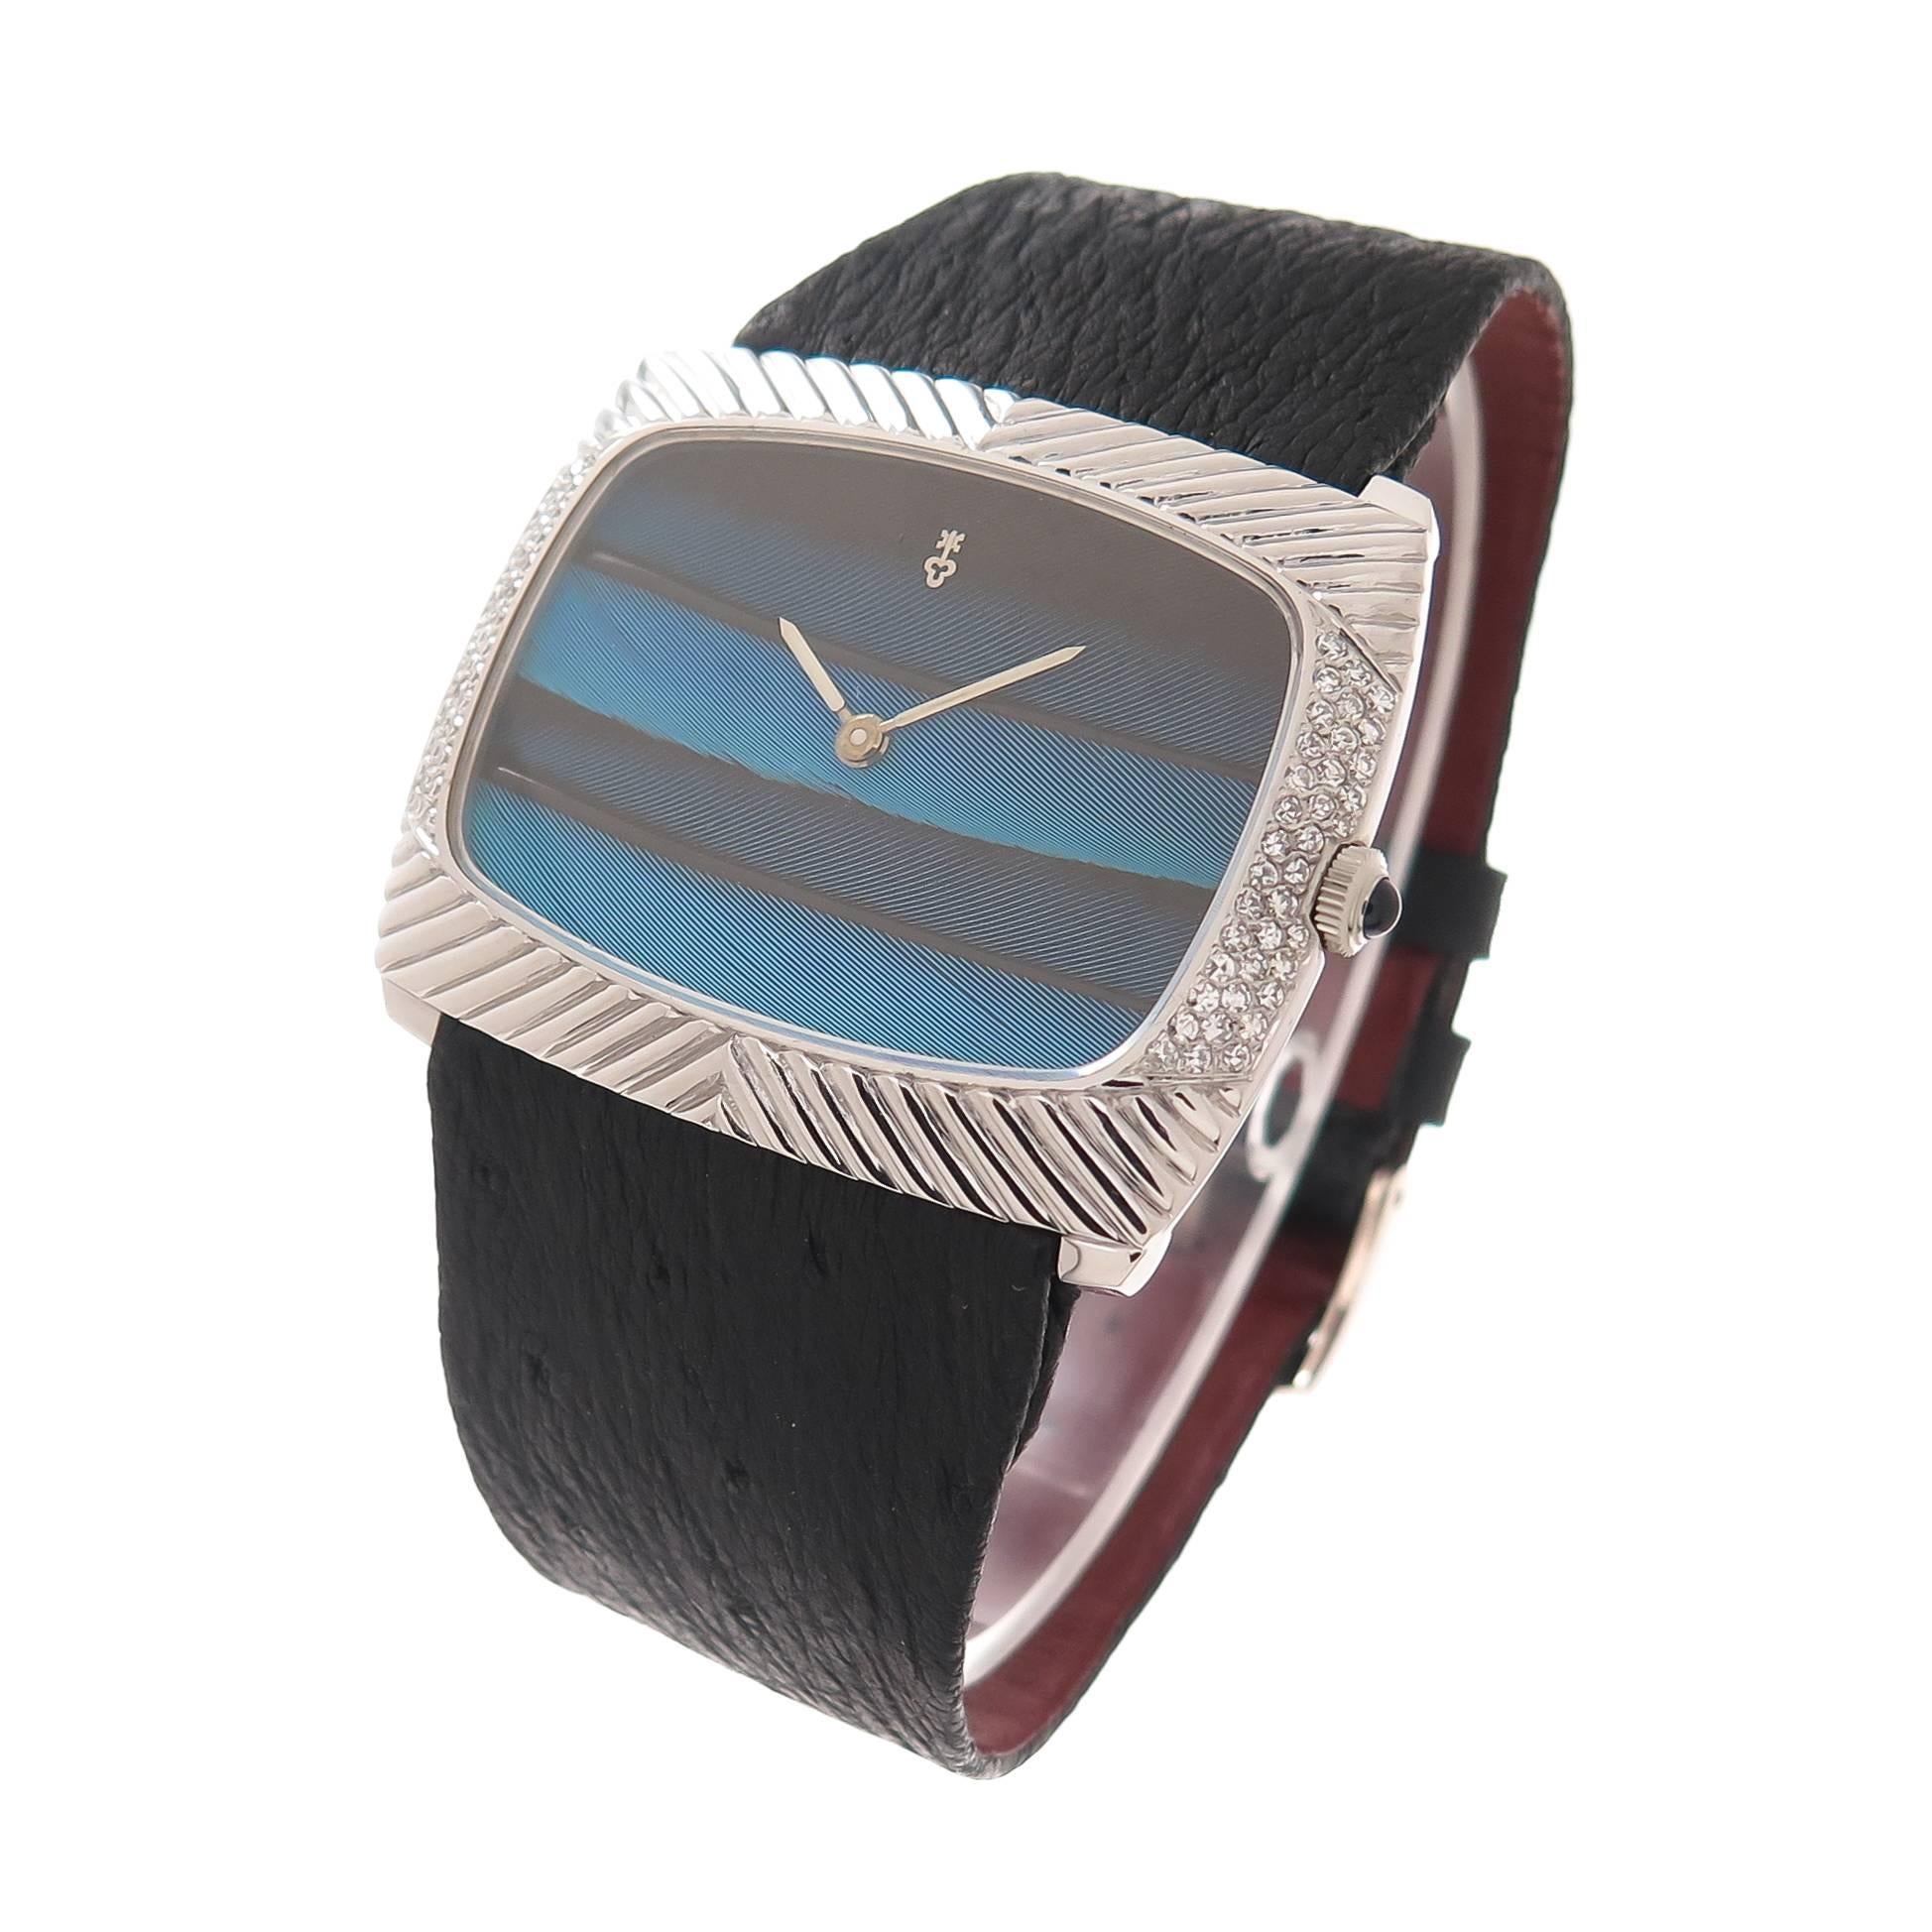 Circa 1970 Corum over-sized 18K White Gold Wrist watch with Diamond set case and Peacock Feather Dial. Measuring 1 5/8 inch X  1 3/8 inch, set on either side with 3 rows of fine White single cut Diamonds totaling 1 Carat. Manual wind 17 jewel